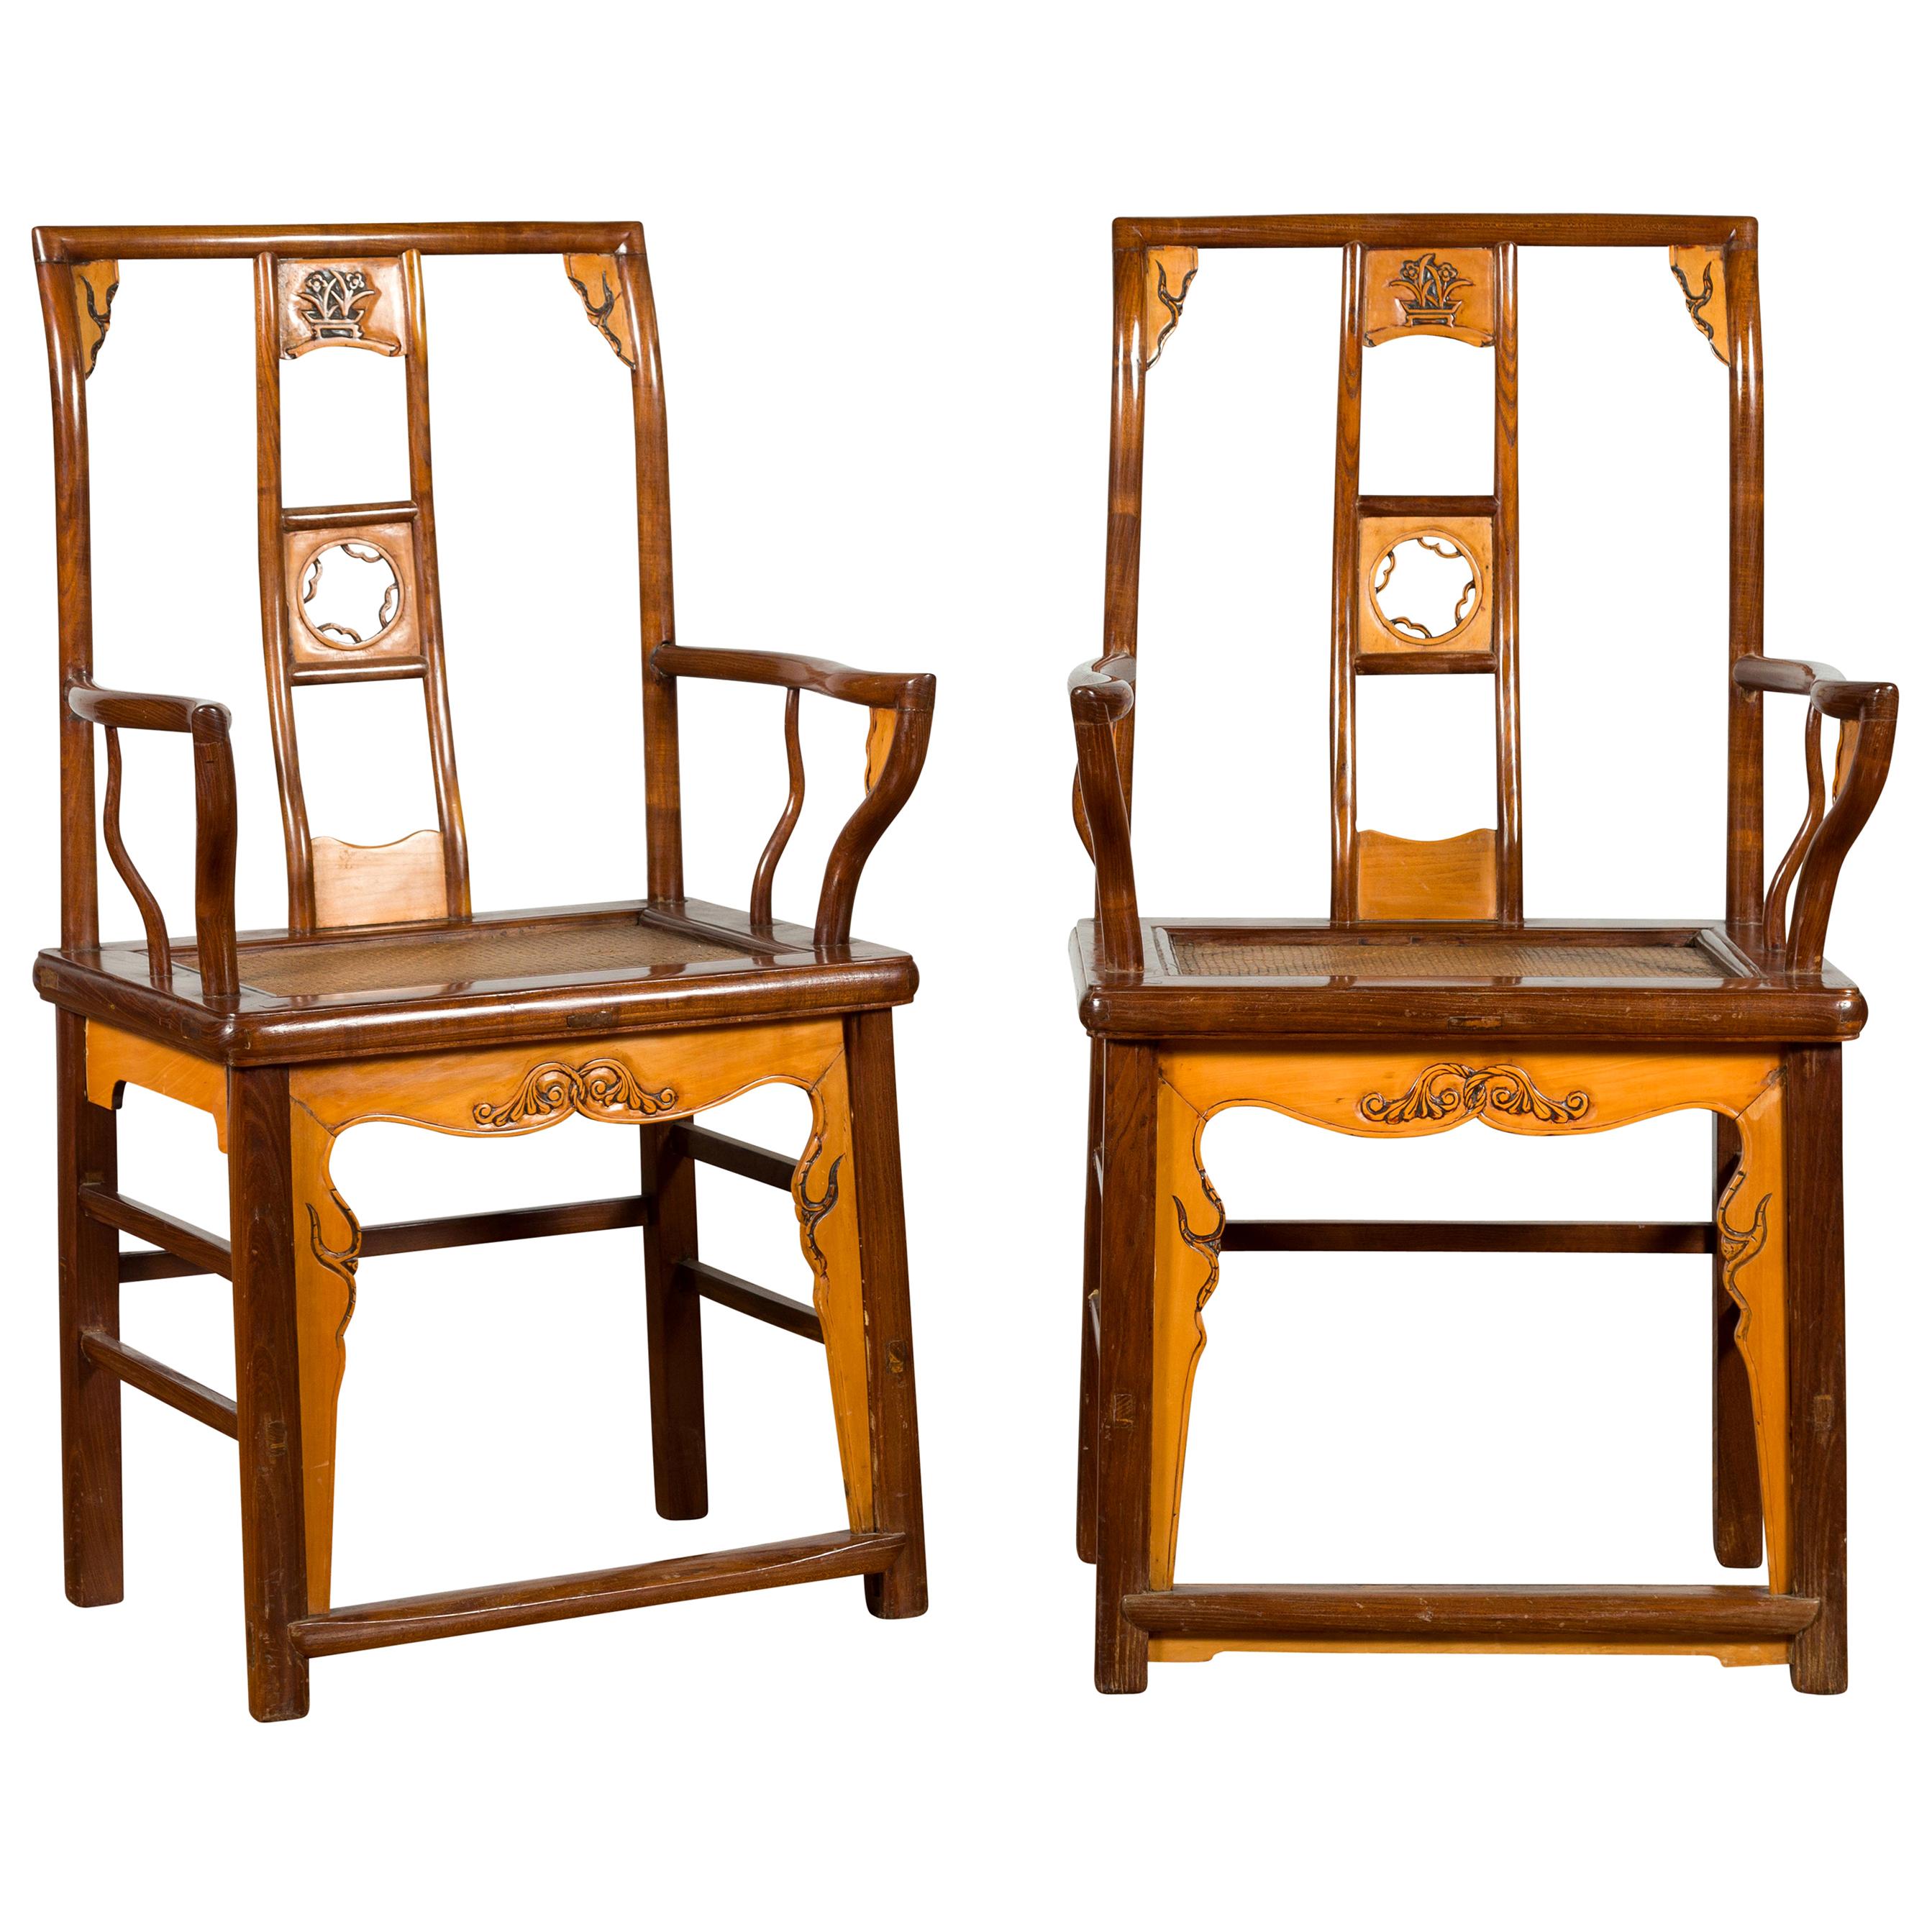 Pair of Chinese Antique Elm and Fruitwood Yoke Back Armchairs with Rattan Seats